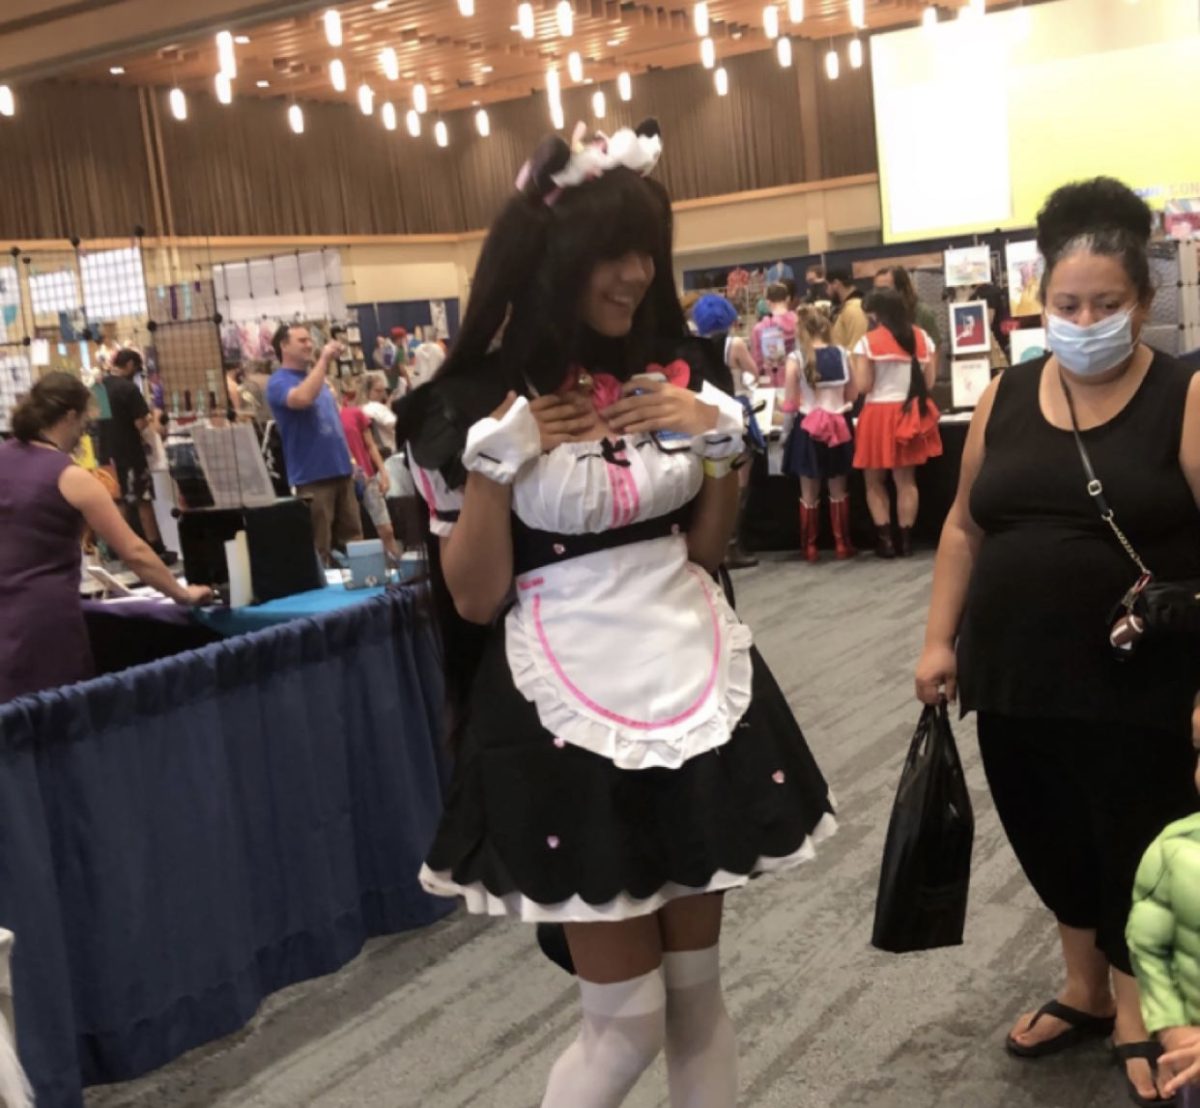 A cosplayer interacting with people at the event
Provided by: Karizma Woodard 

